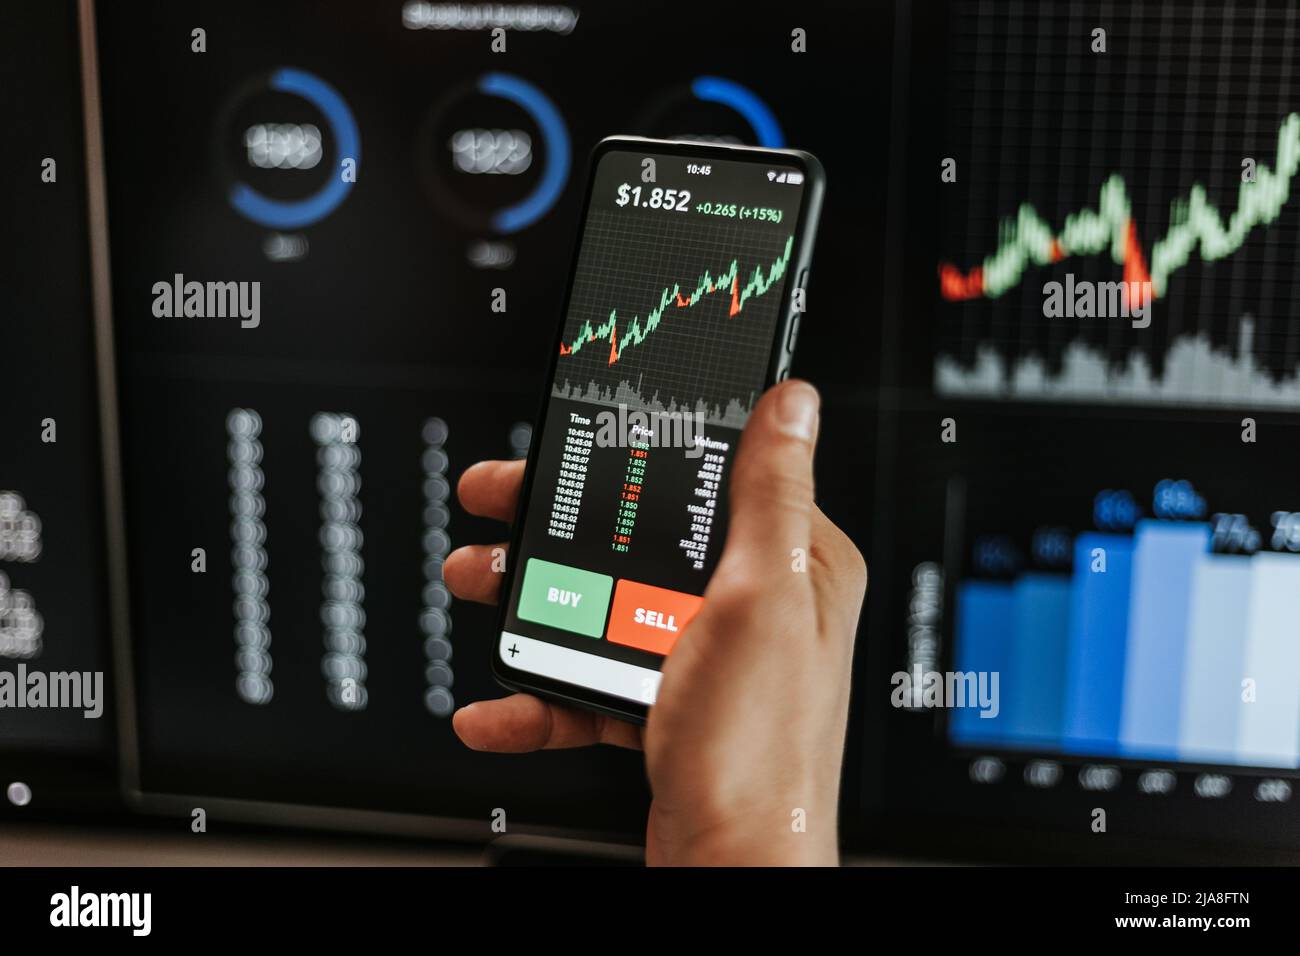 Financial trader man investor using mobile phone app to analyze stock market Stock Photo